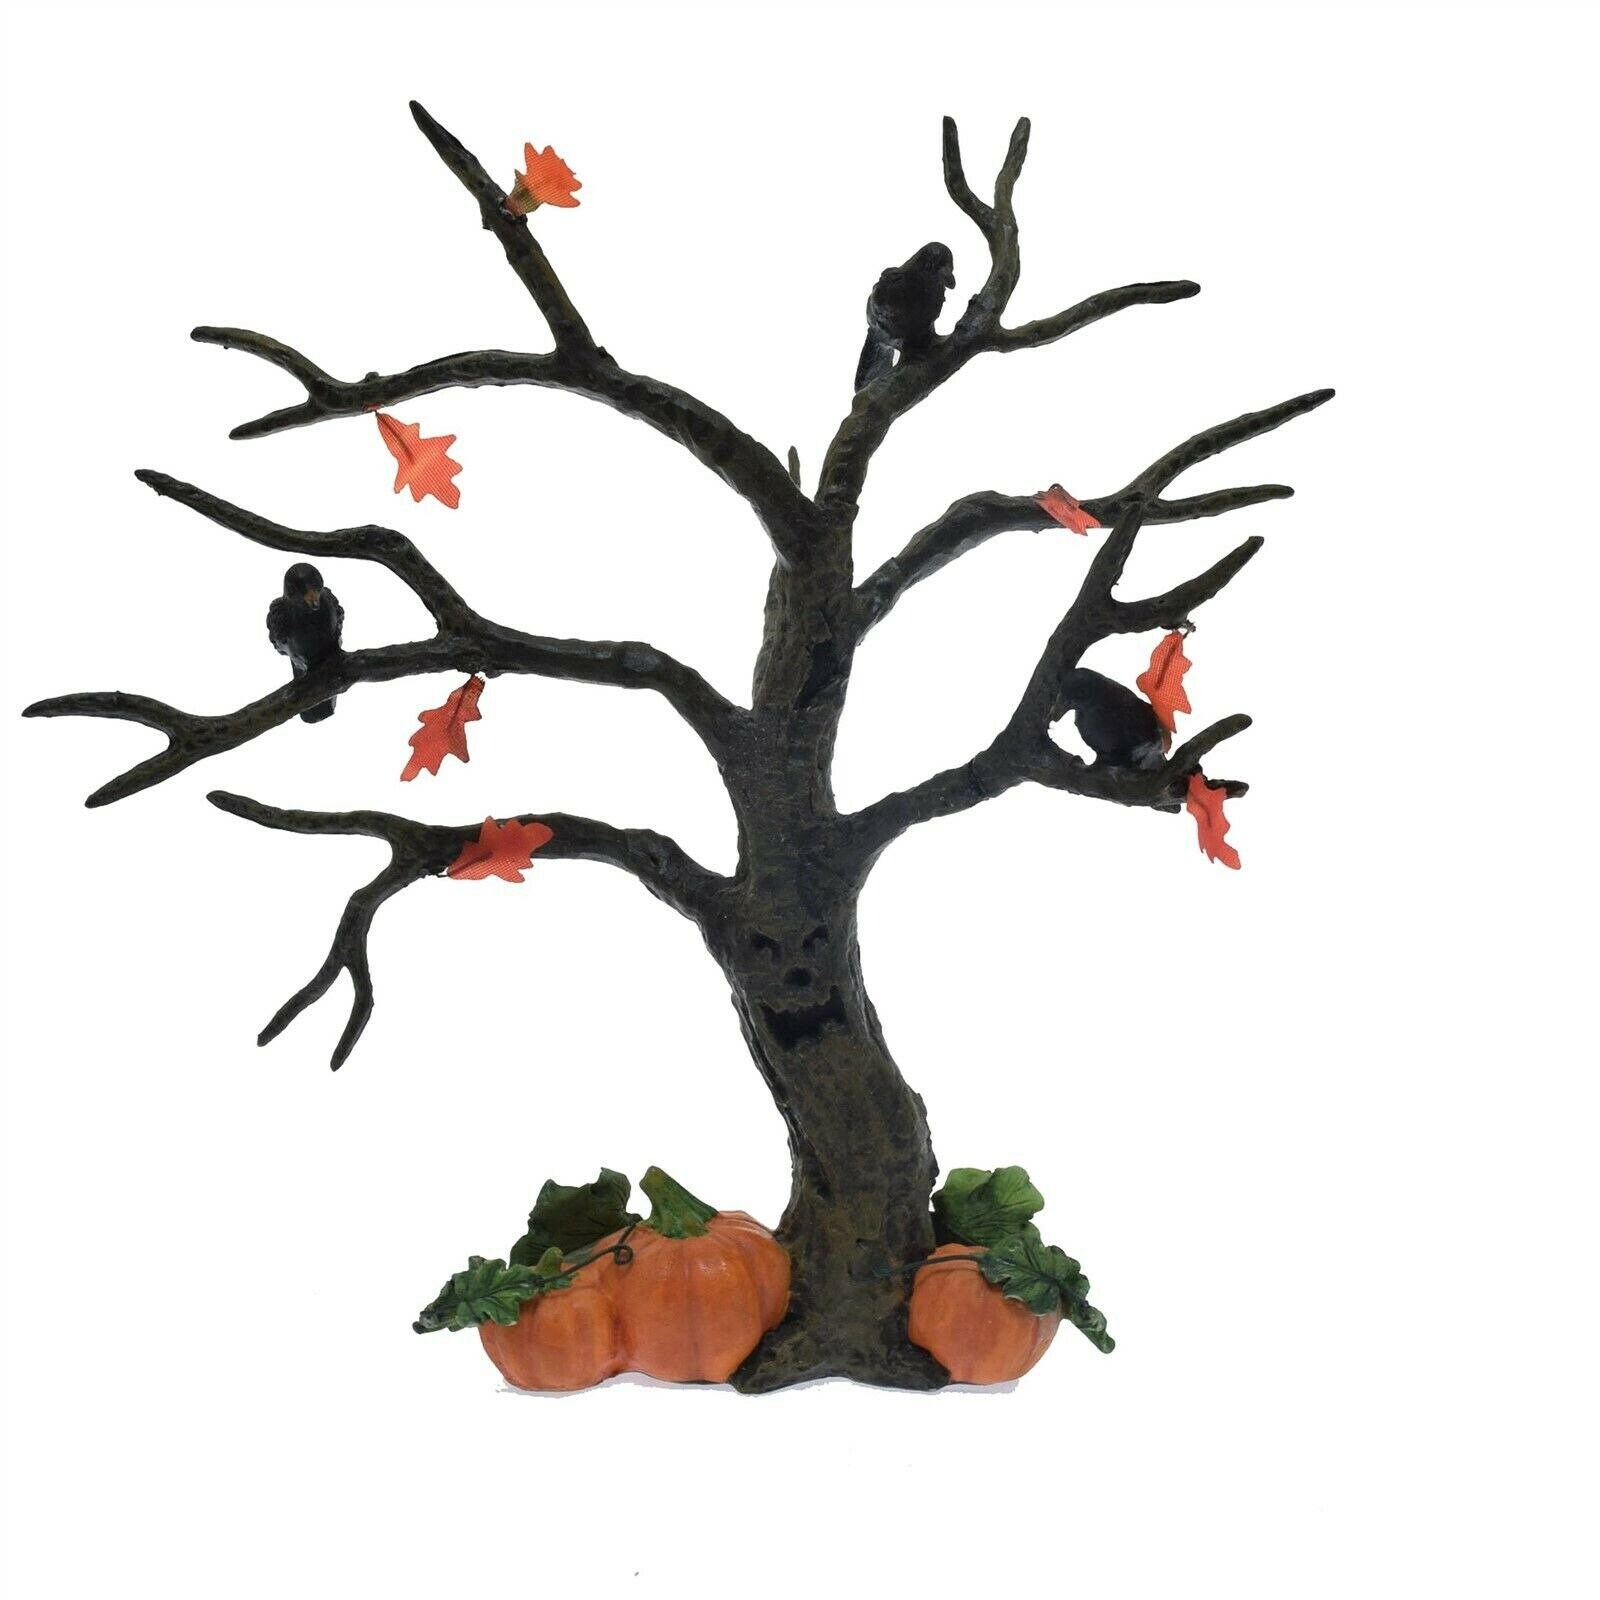 Department 56 Accessories for Villages Halloween Spooky Trash Cans Accessory Figurine 4024036 